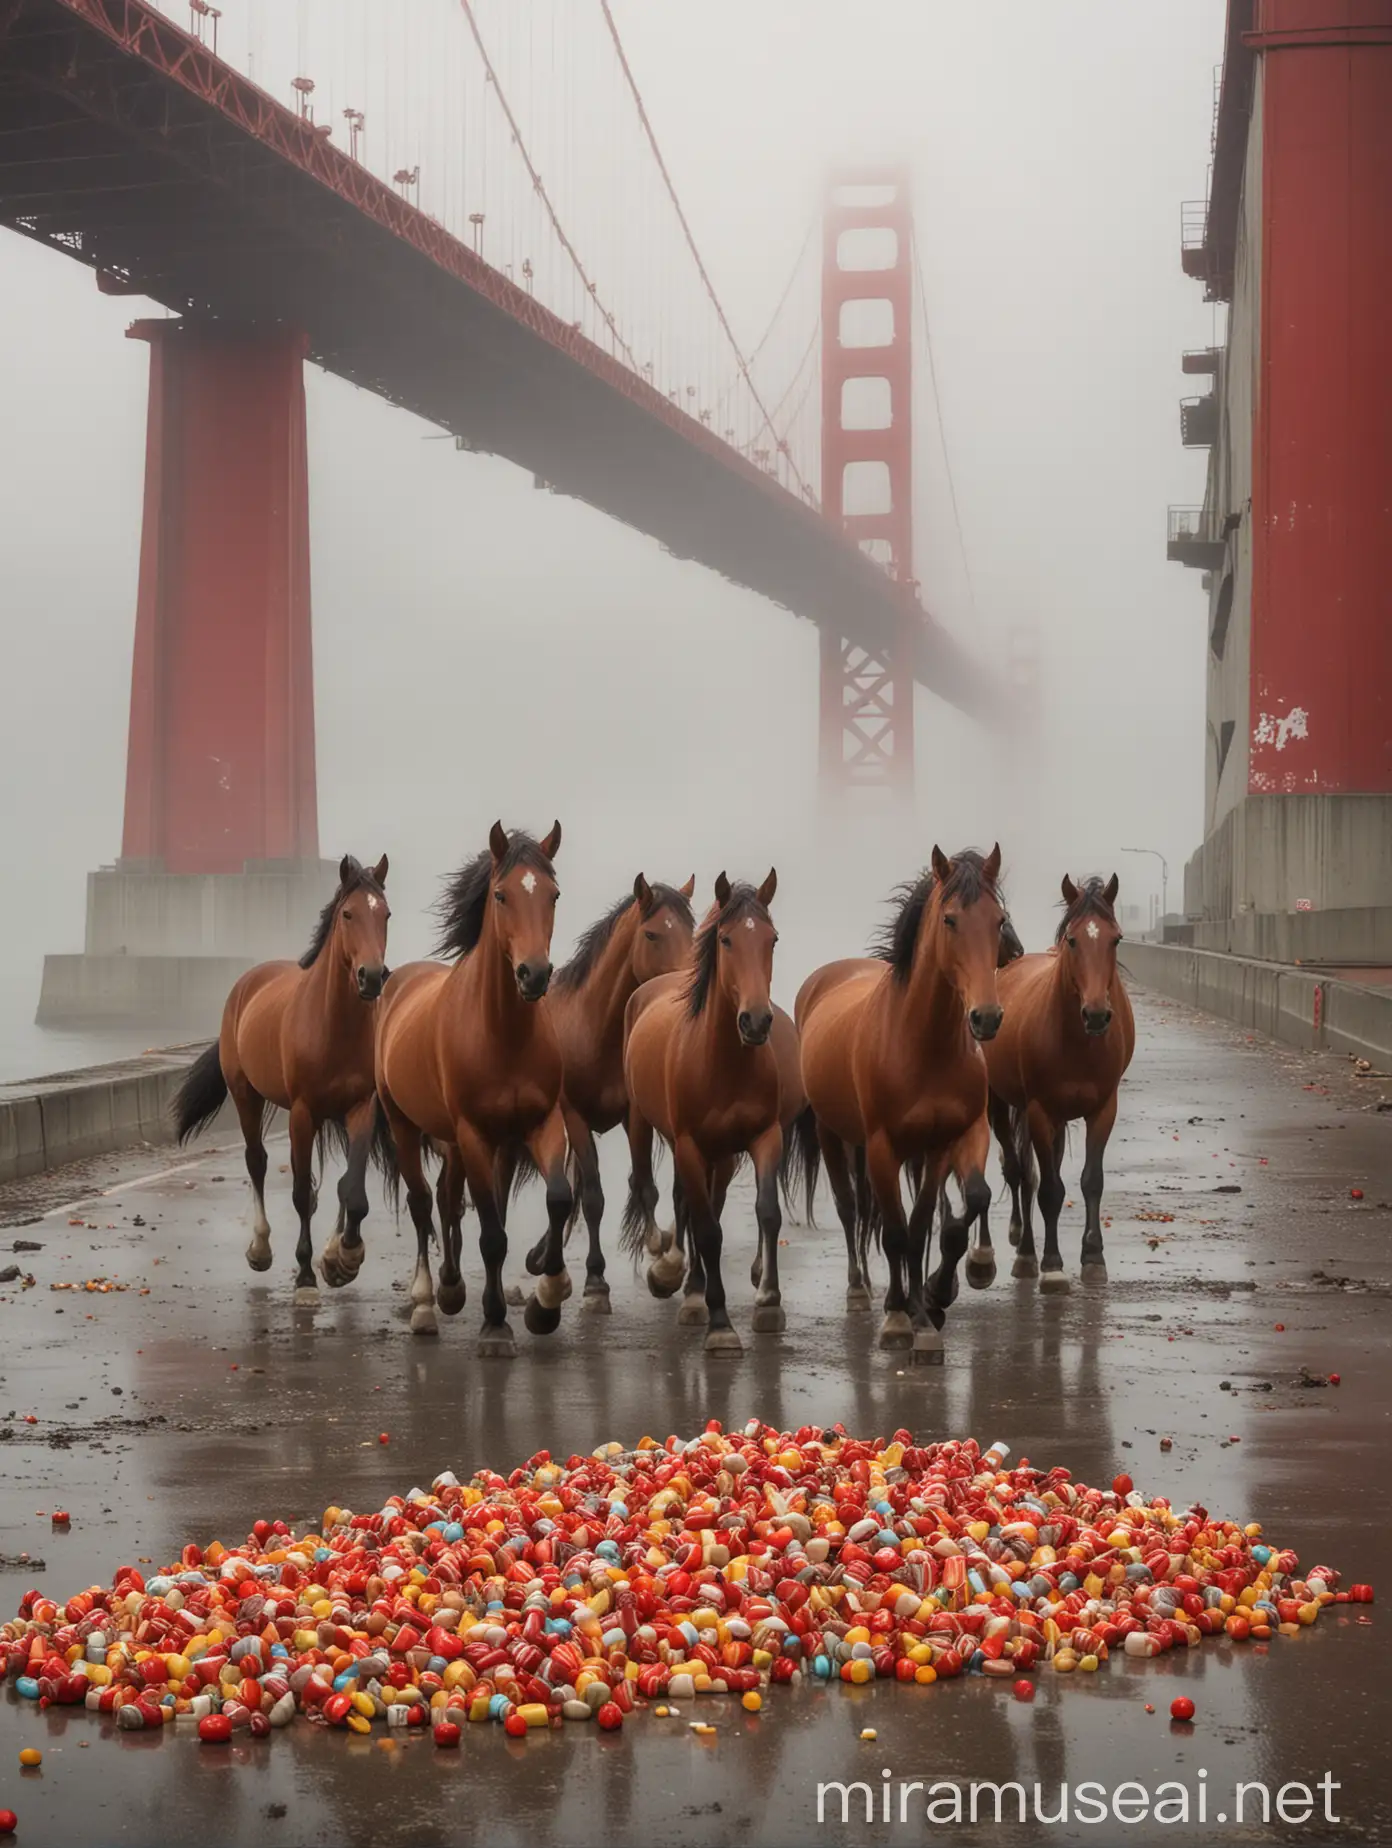 Epic Wild Horses Galloping under Foggy San Francisco Bridge with Candy and Trumpet Symphony